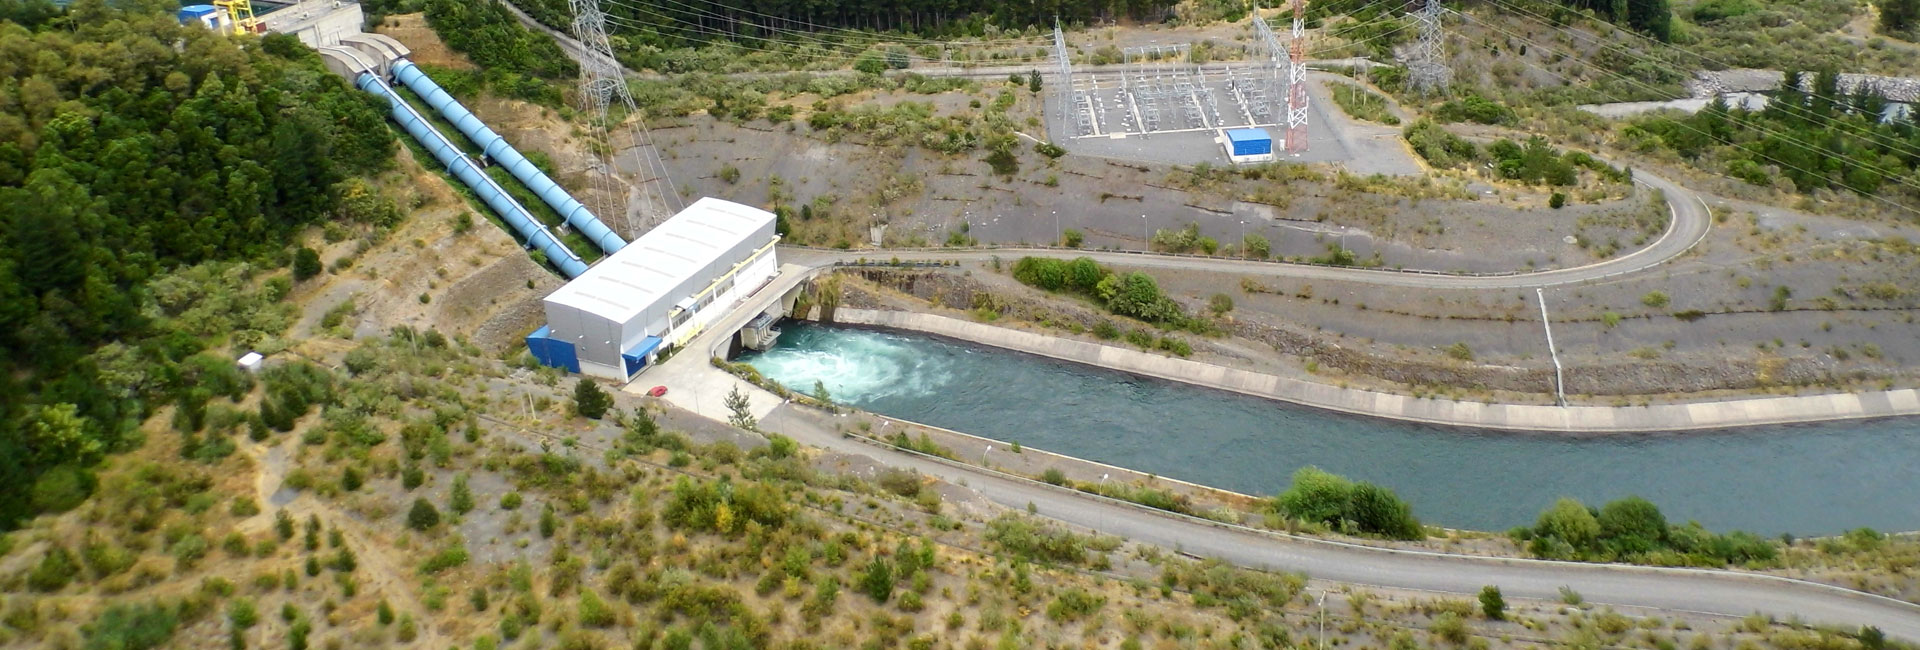 Quilleco Hydroelectric Power Plant